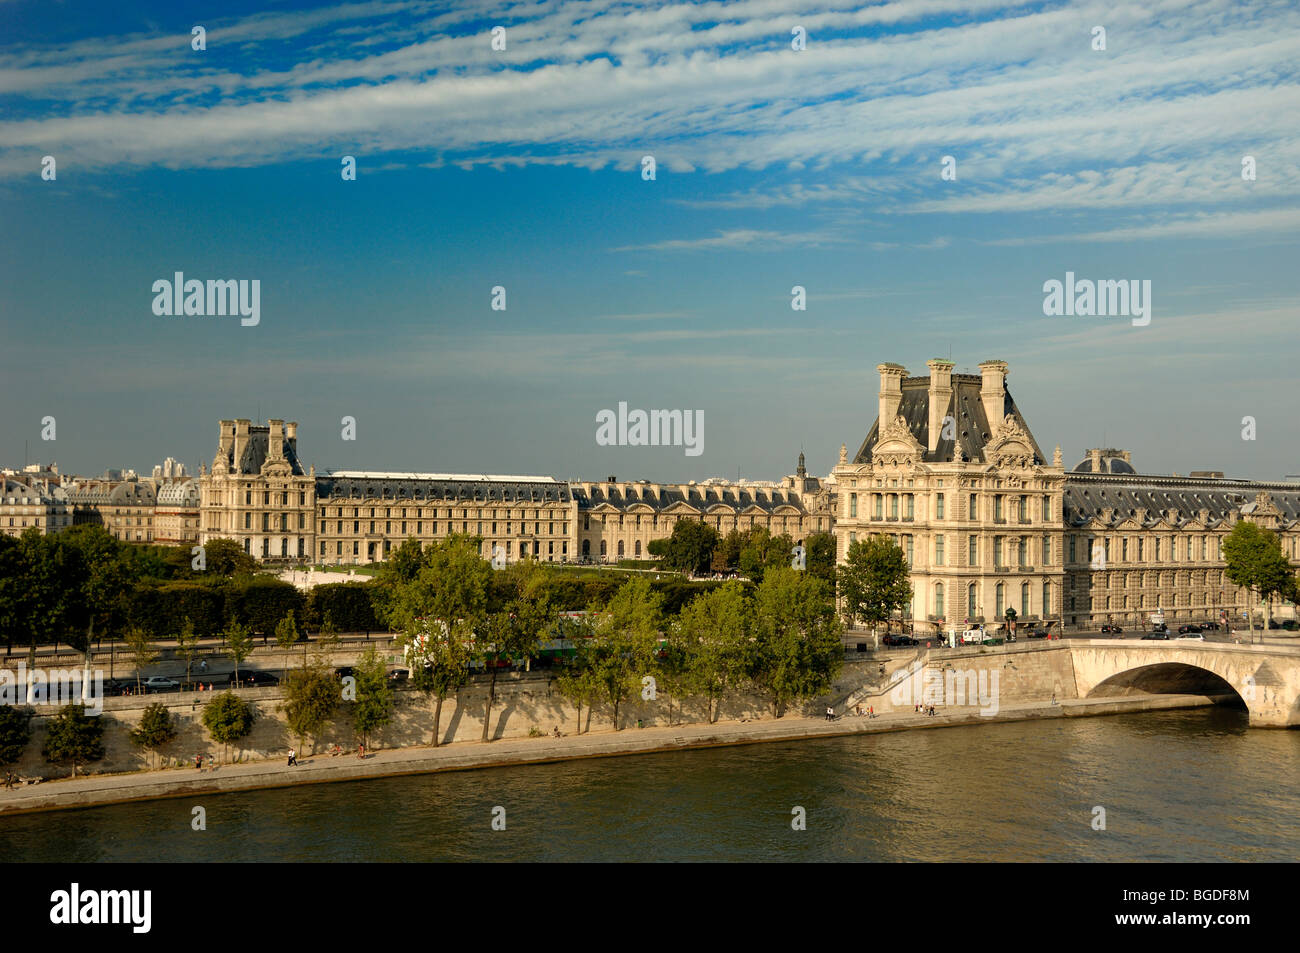 The Louvre Museum or Louvre Palace & River Seine from the Roof Terrace of the Quai d'Orsay Museum, Paris, France Stock Photo